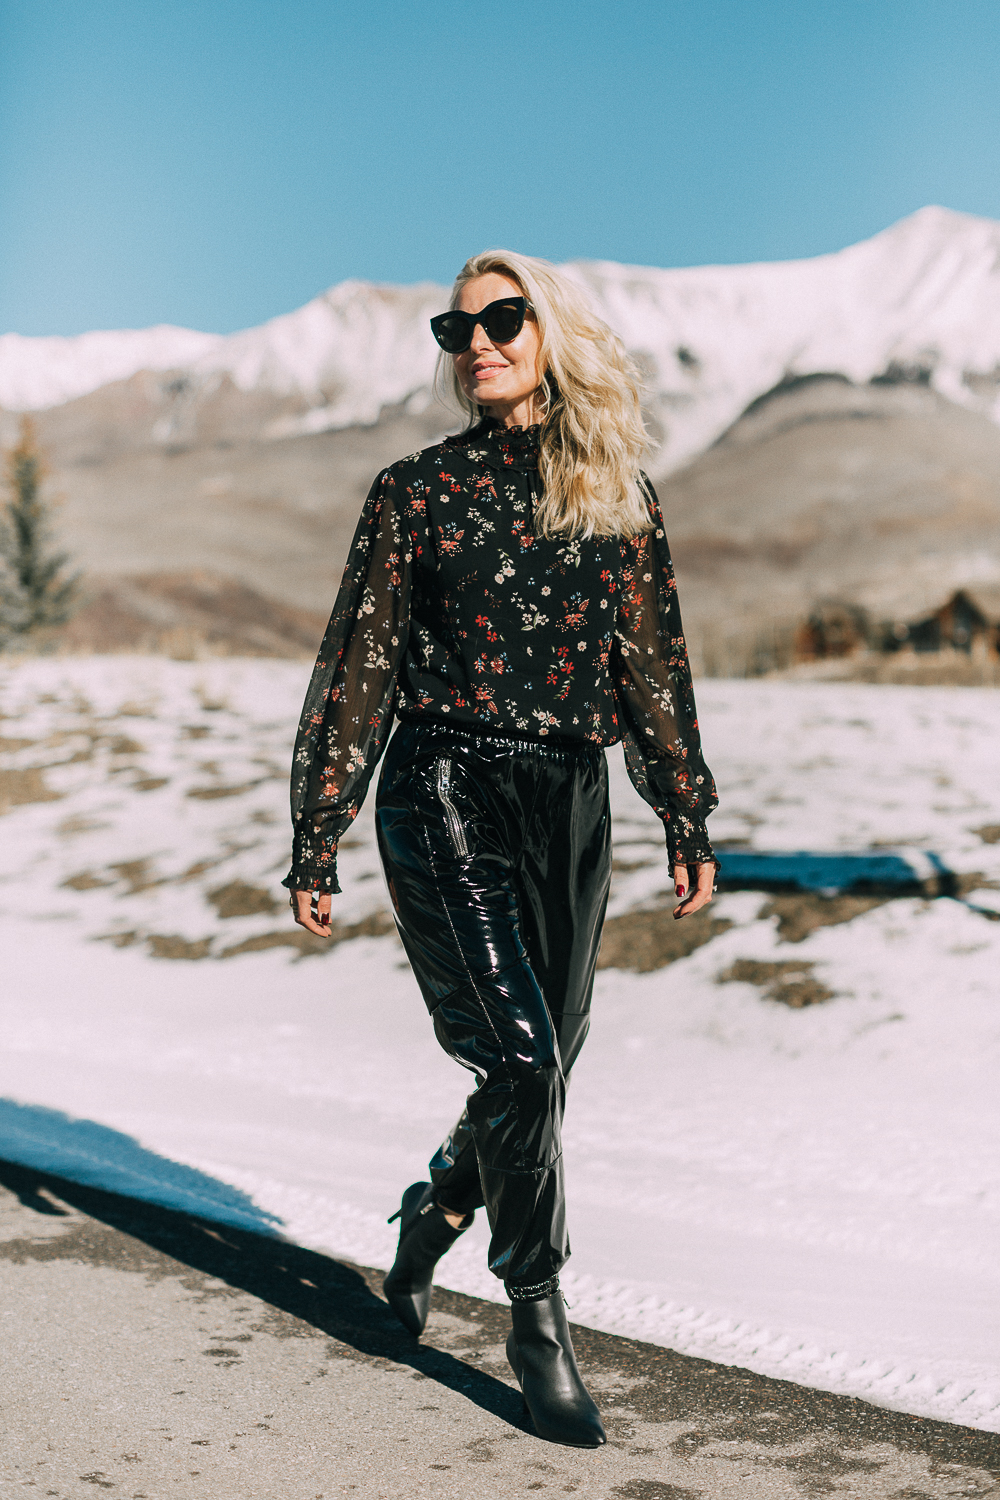 Fashion blogger Erin Busbee of Busbee Style wearing black vinyl jogger pants by RtA paired with a dark floral black blouse by Sanctuary with black booties by Michael Kors, walking in Telluride, Colorado